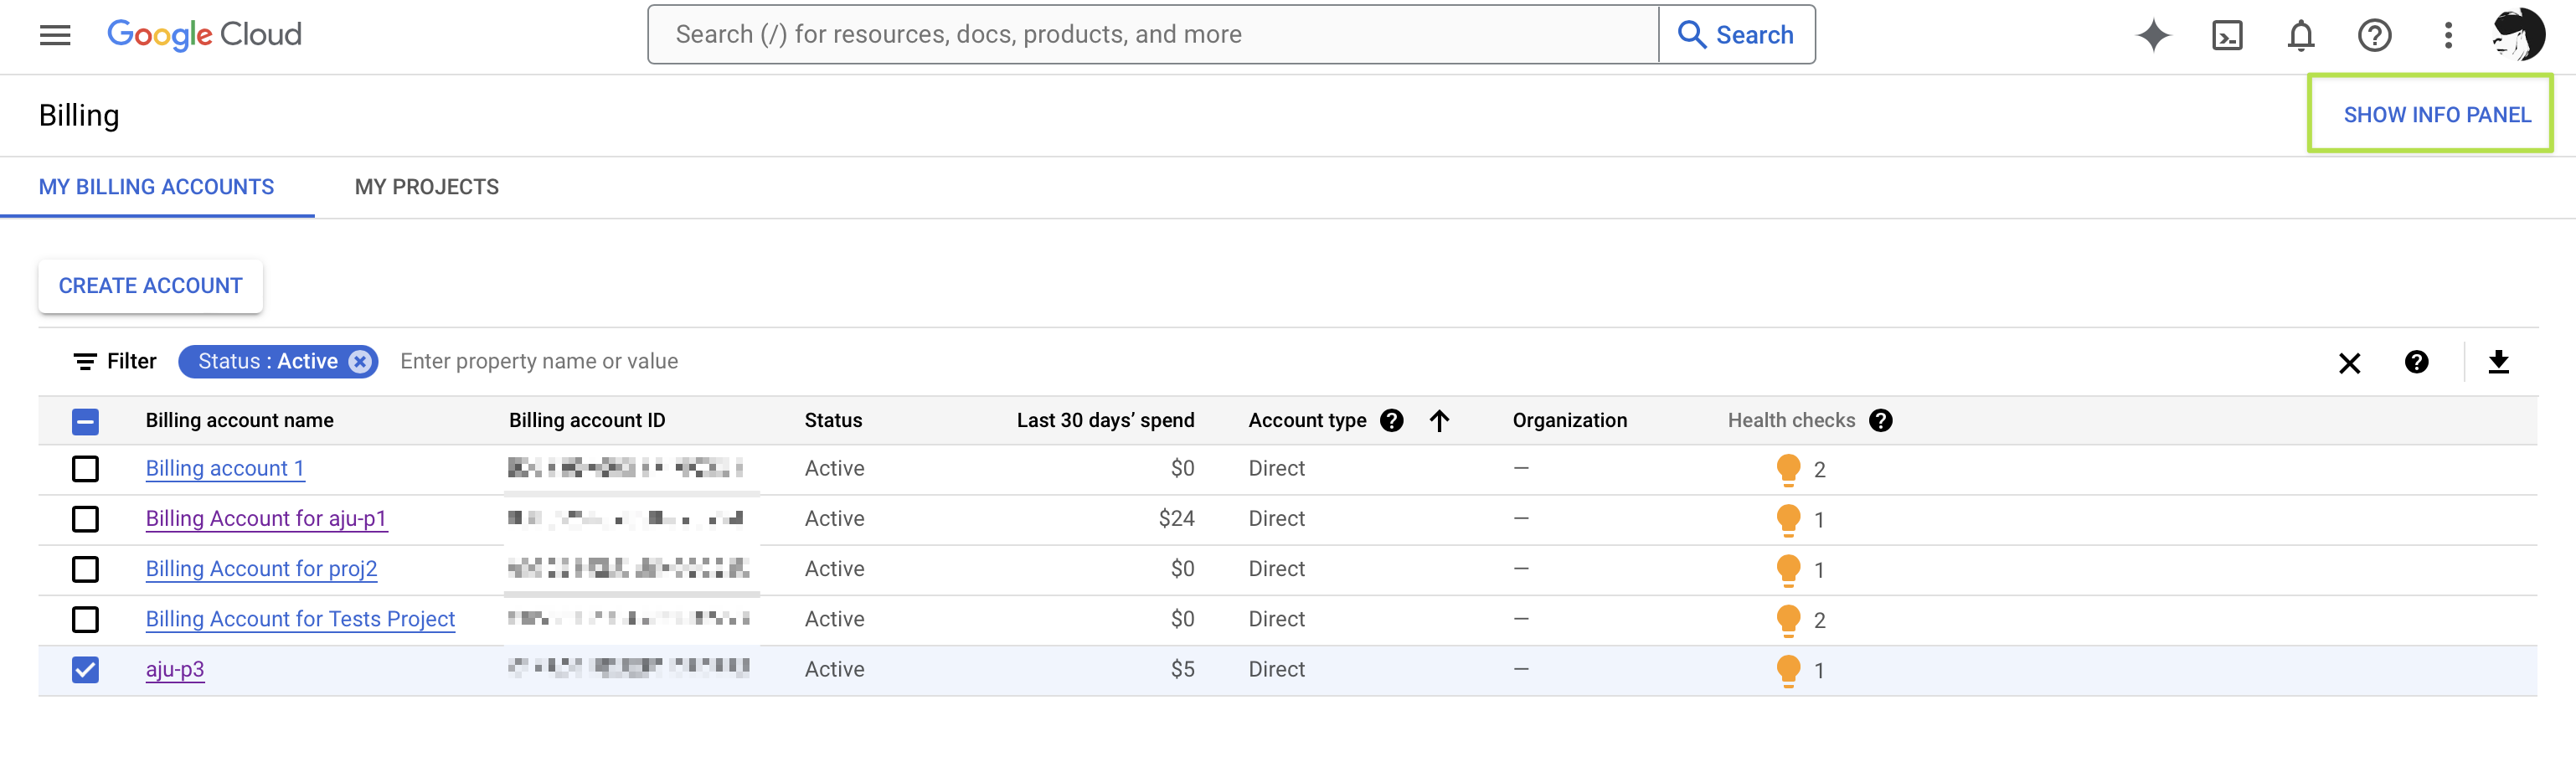 Screenshot of billing accounts management page in Google Cloud console, highlighting 'Show info panel' button.